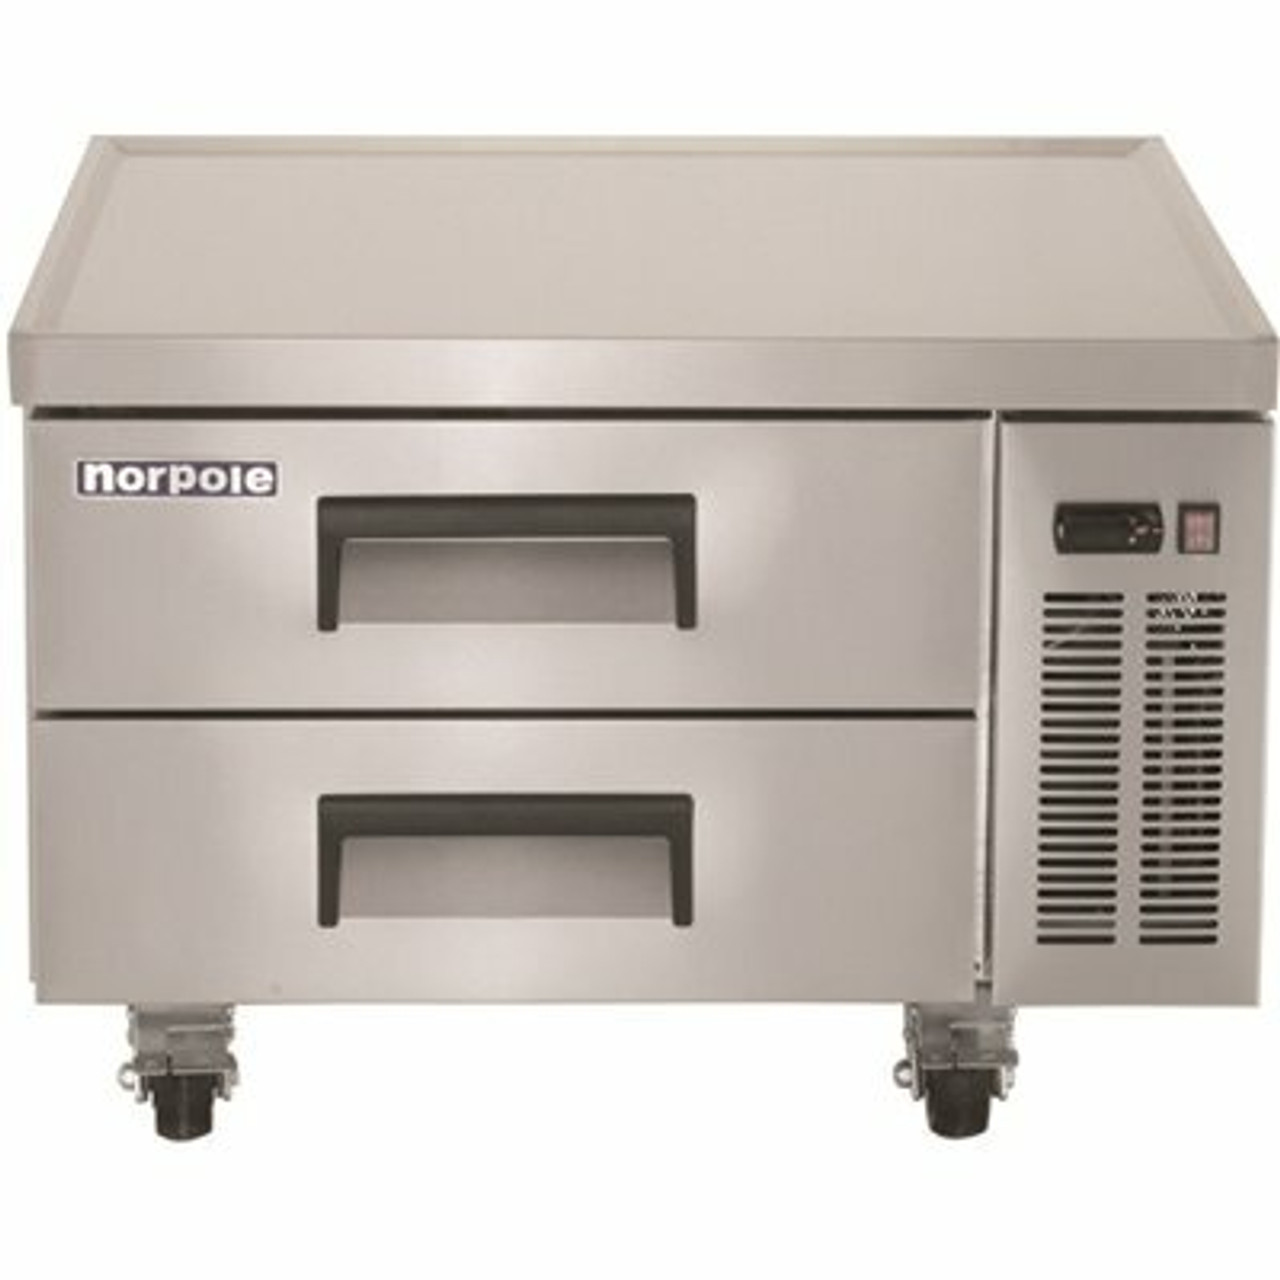 Norpole 36 In. W 29 Cu. Ft. Chef Base Commercial Specialty Refrigerator In Stainless Steel